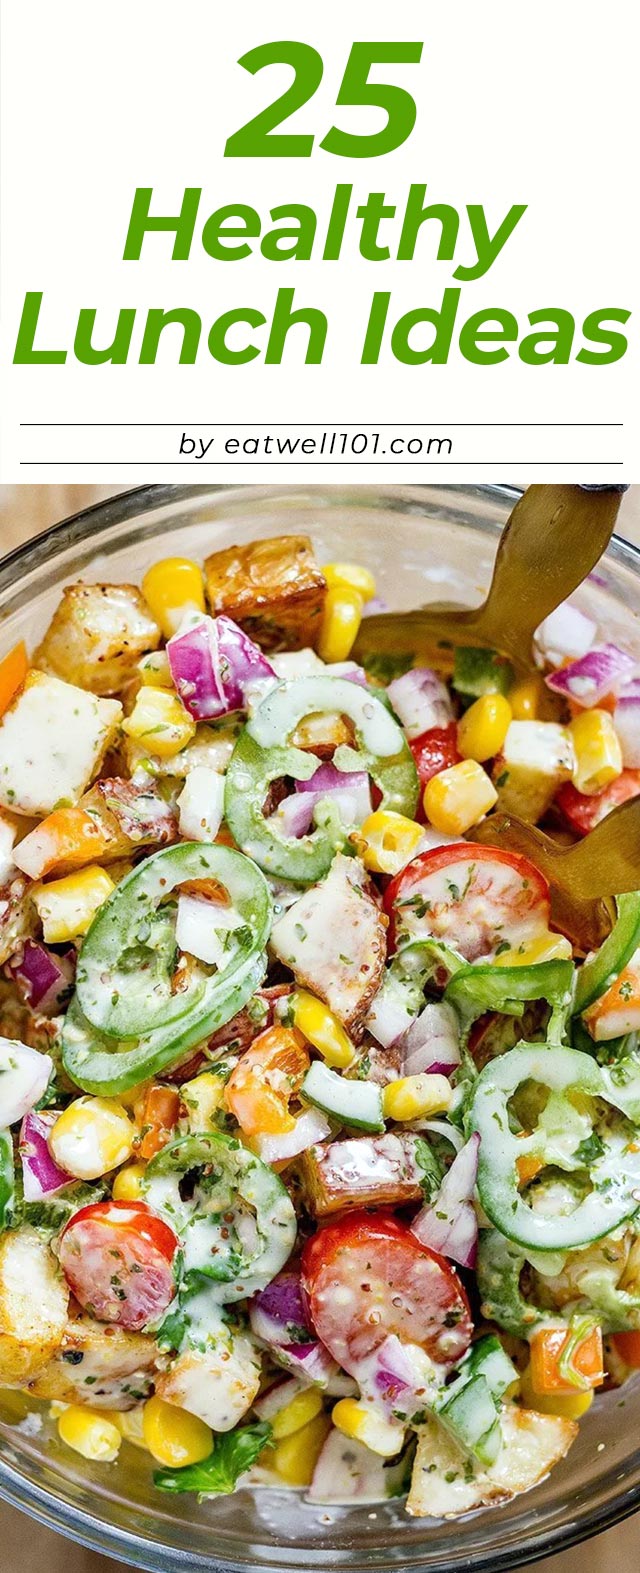 Healthy Lunch Recipes: 25 Easy Healthier Meal Ideas for Lunch — Eatwell101